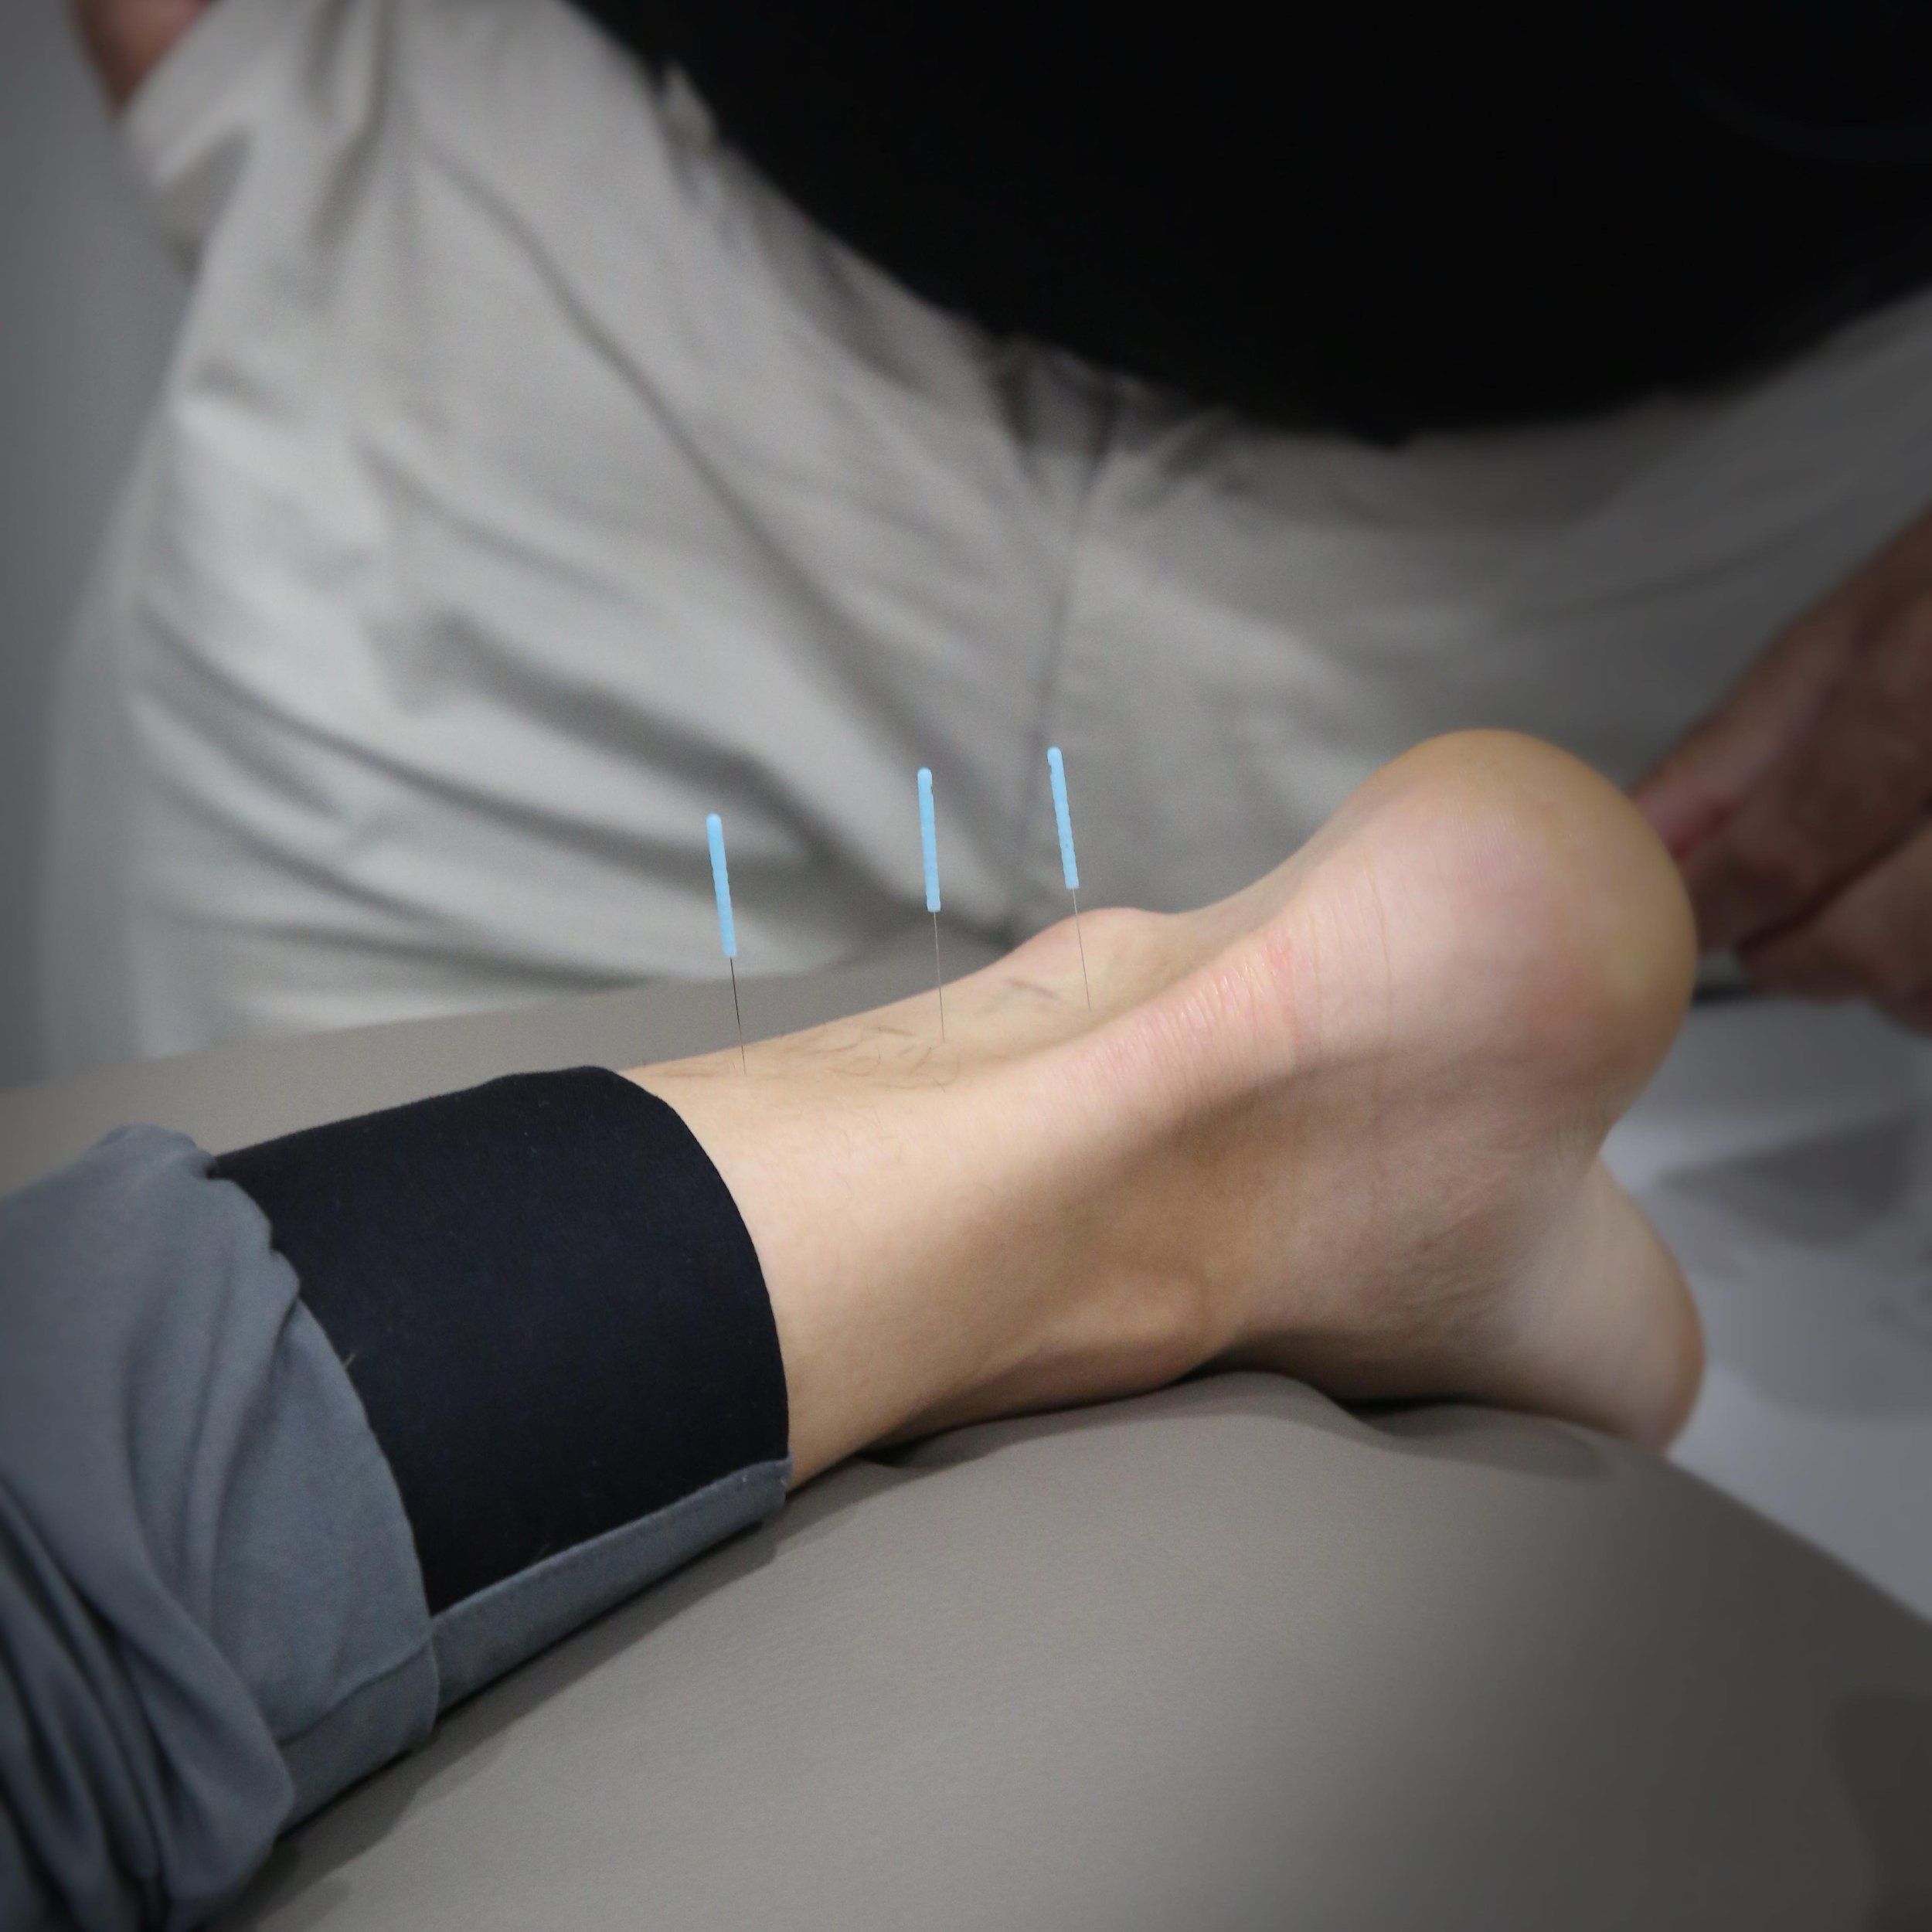 👣 ​Did you know ​​that​ ​our f​e​et and ankle​s ​have many energy pathways​? Acupuncture ​works by stimulating these points, unlocking the body&rsquo;s innate ability to heal.​ Here are just a couple of examples of acupuncture points on the feet and